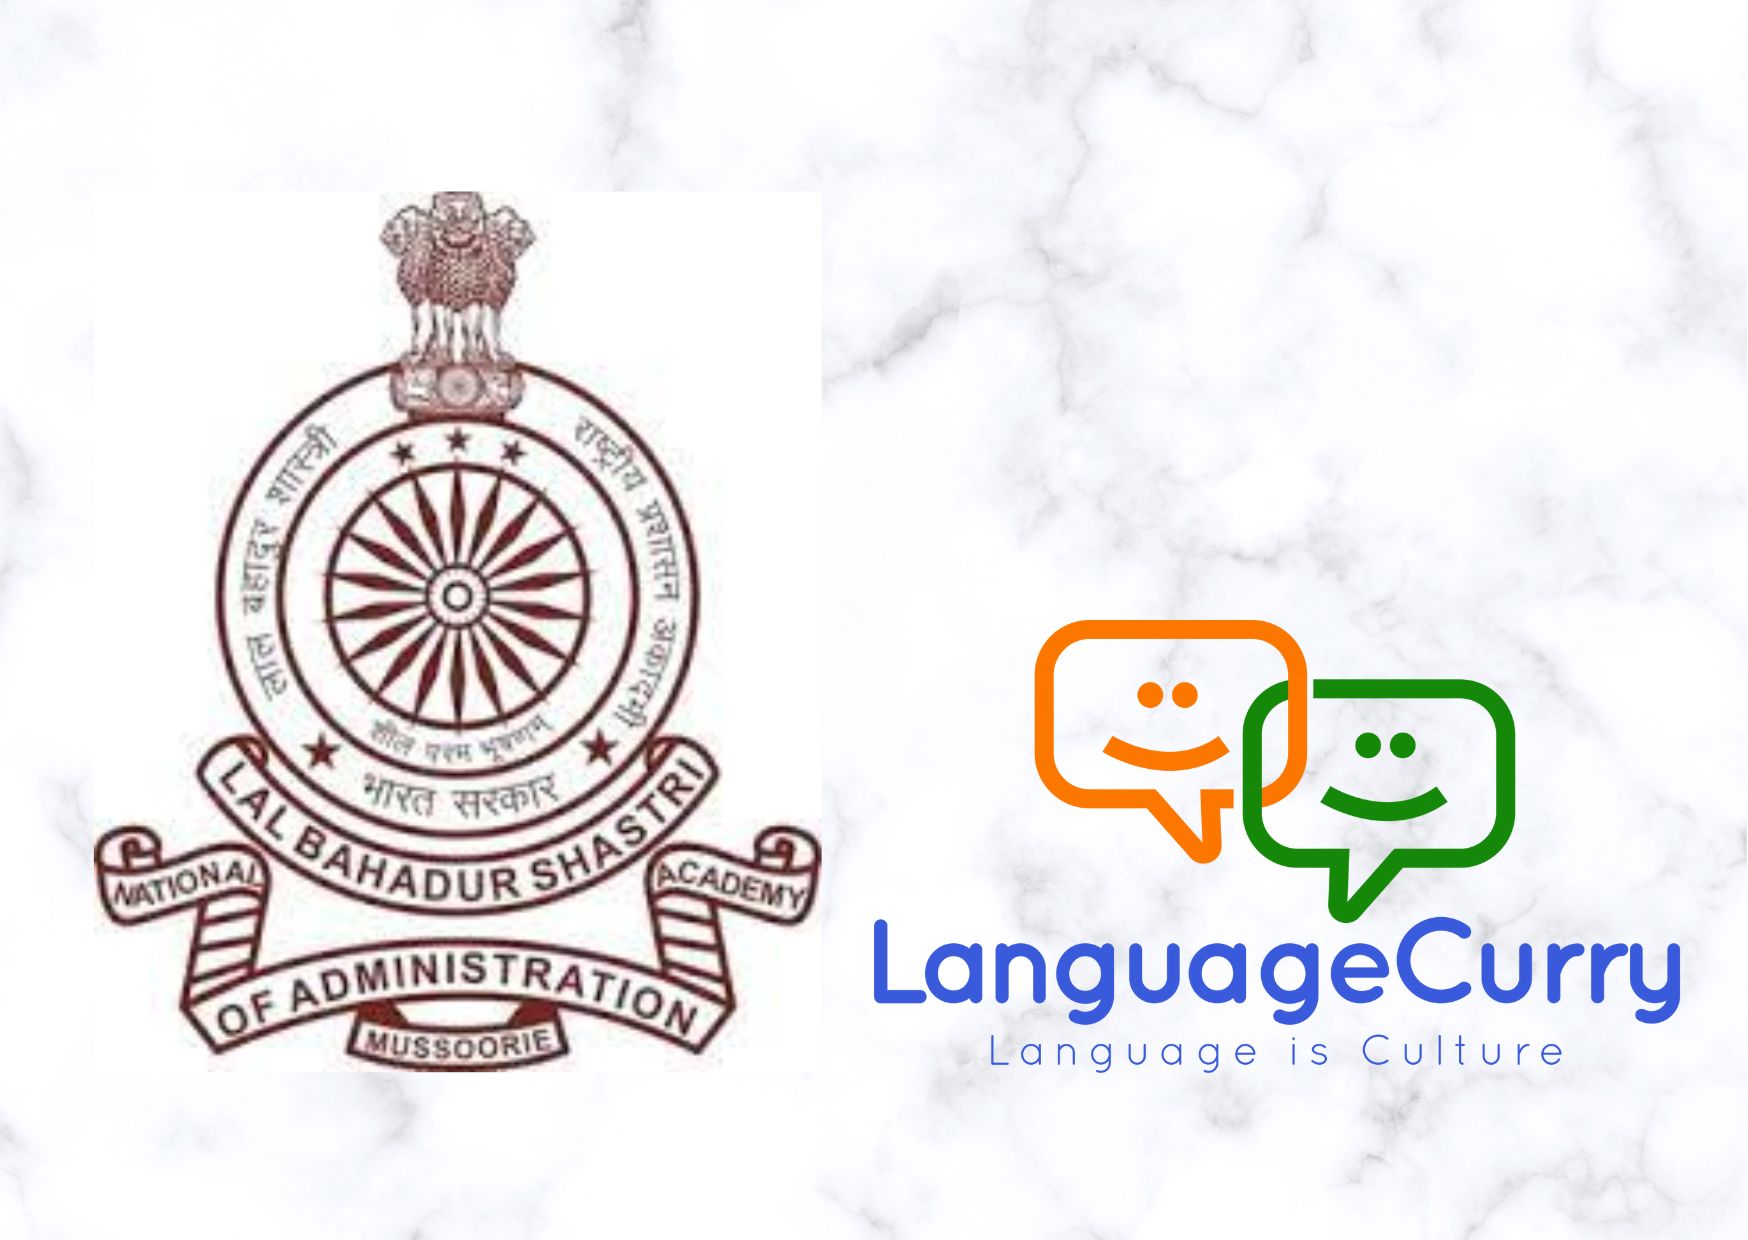 Language Curry partners with Government of India’s LBSNAA to train India’s administrative officers